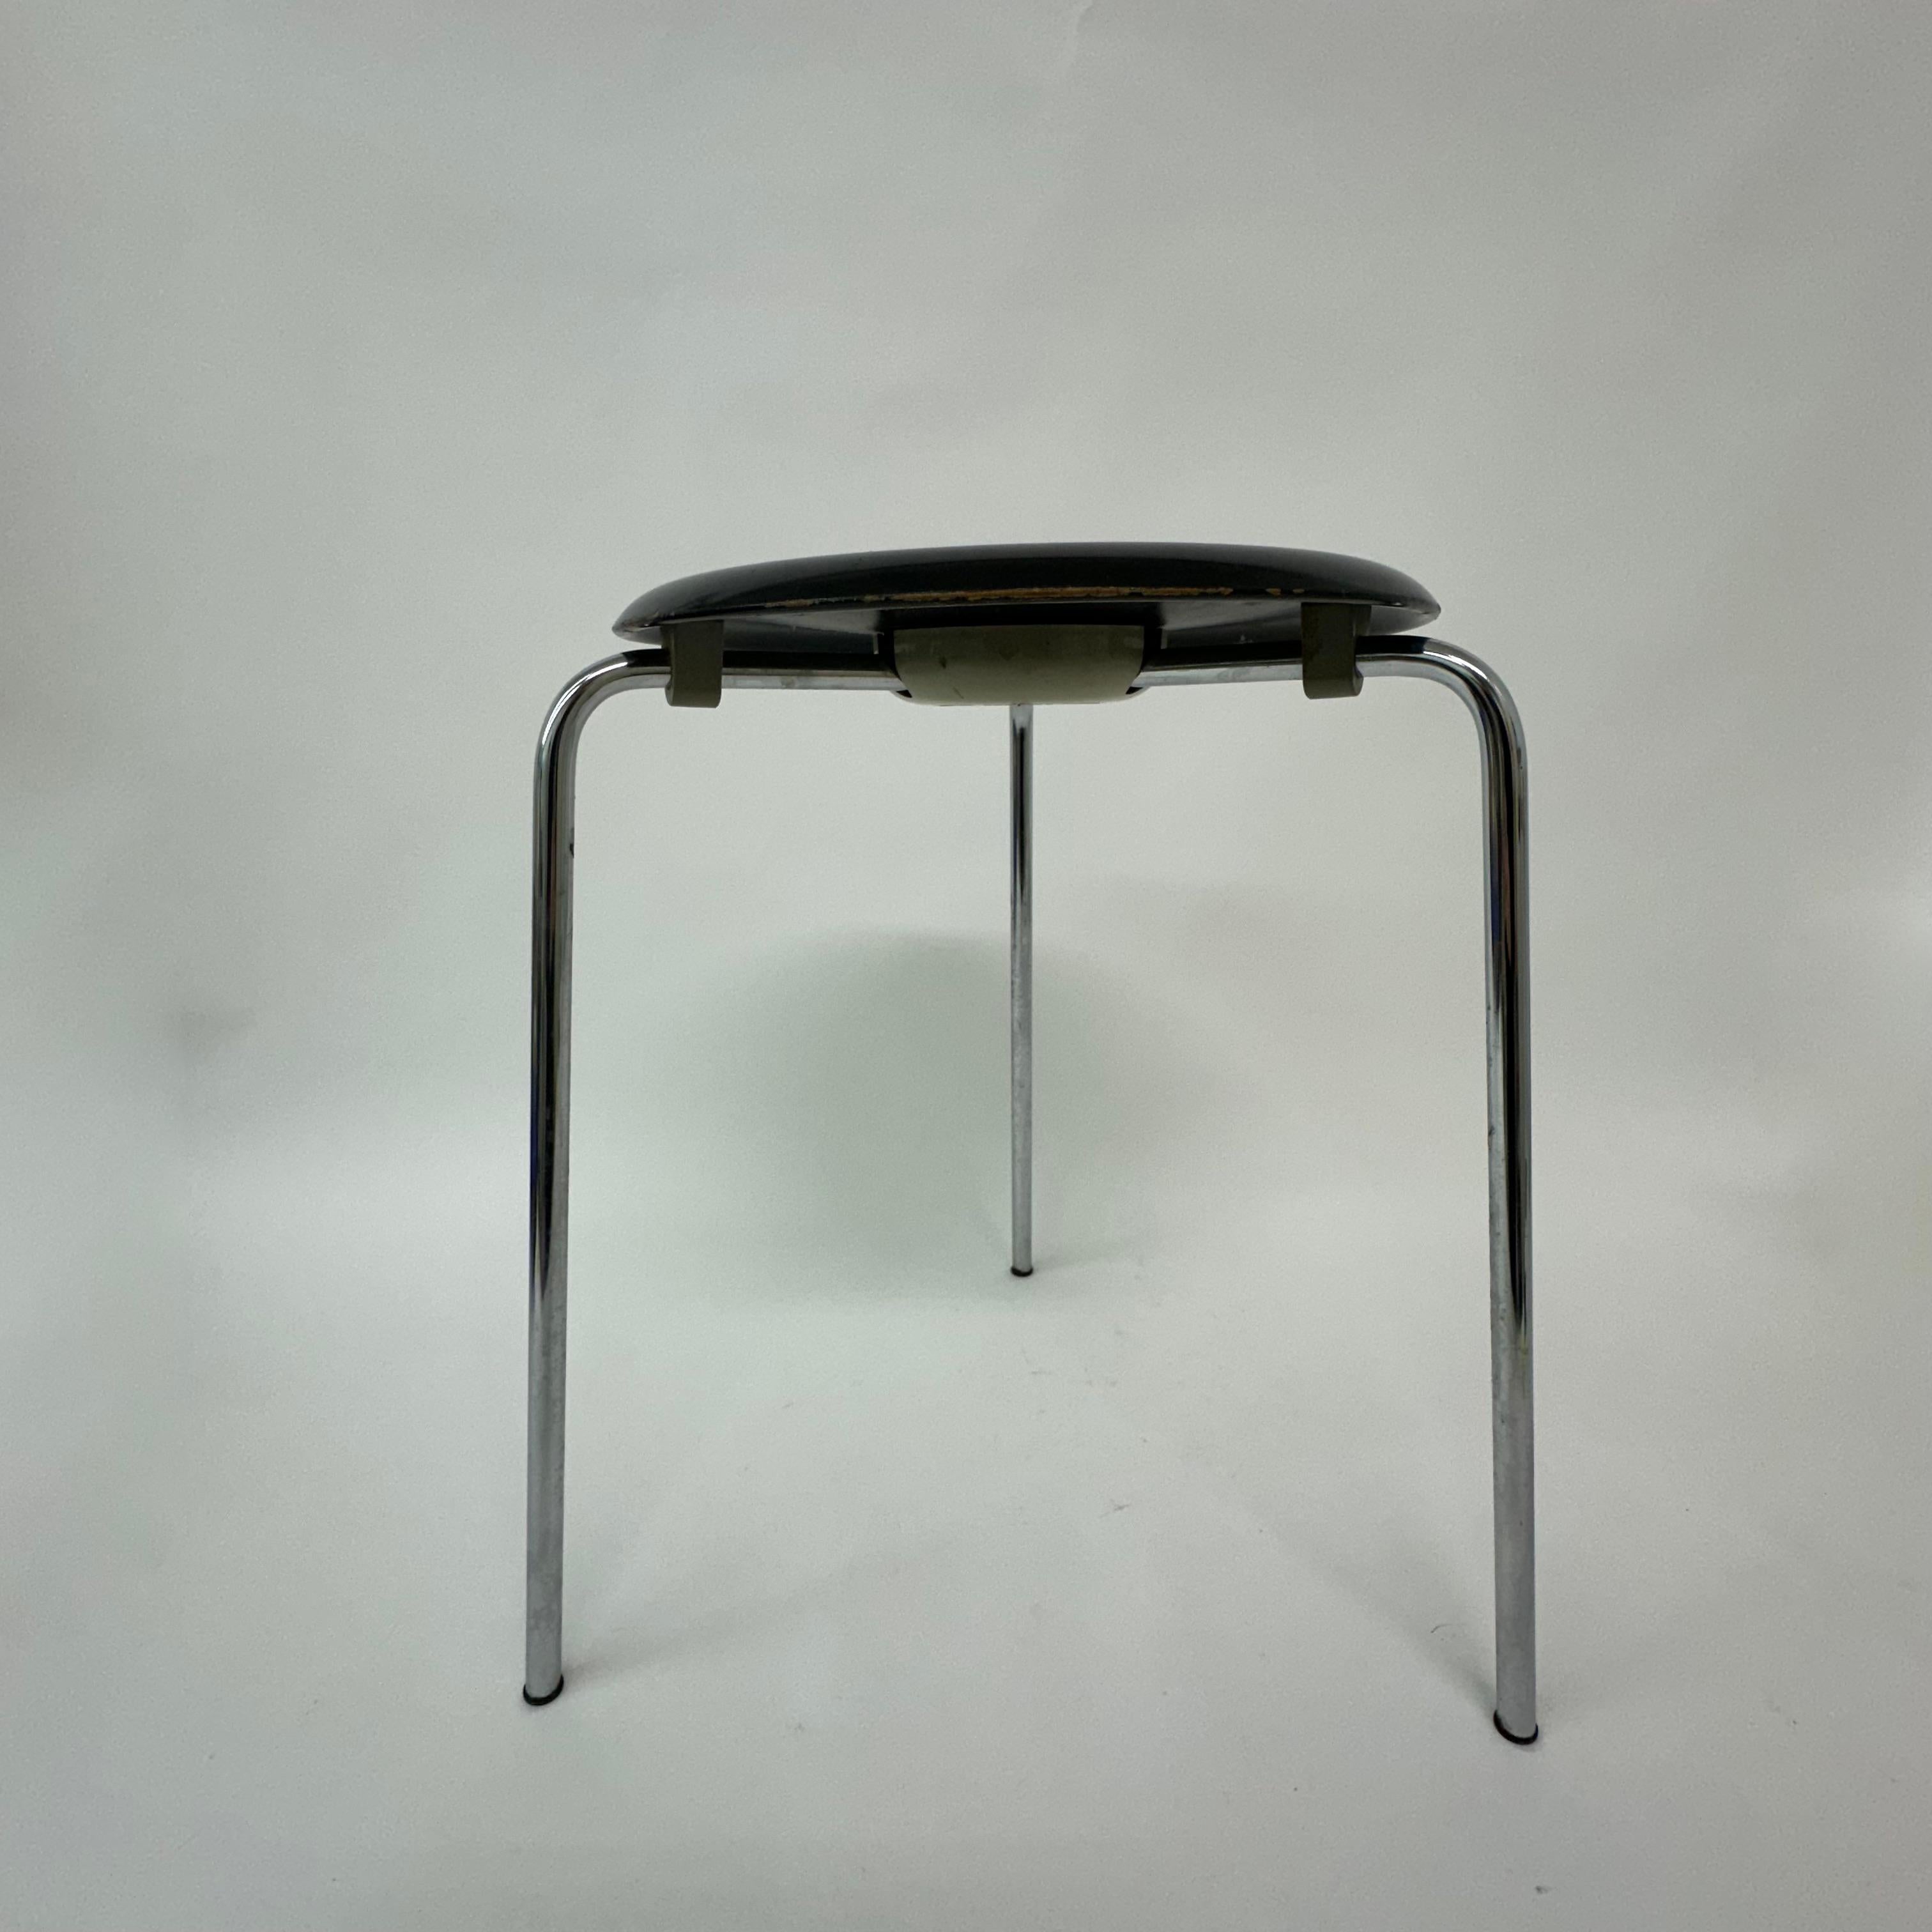 Rare vintage stool model 3170 by Arne Jacobsen for Fritz Hansen , 1970’s

Dimensions: 45cm Height, 35cm Width, 40cm Depth
Condition: Paint has some small chips and cracks from age and use.
Period: 1970’s
Material: Metal, Wood
Color: Black , silver